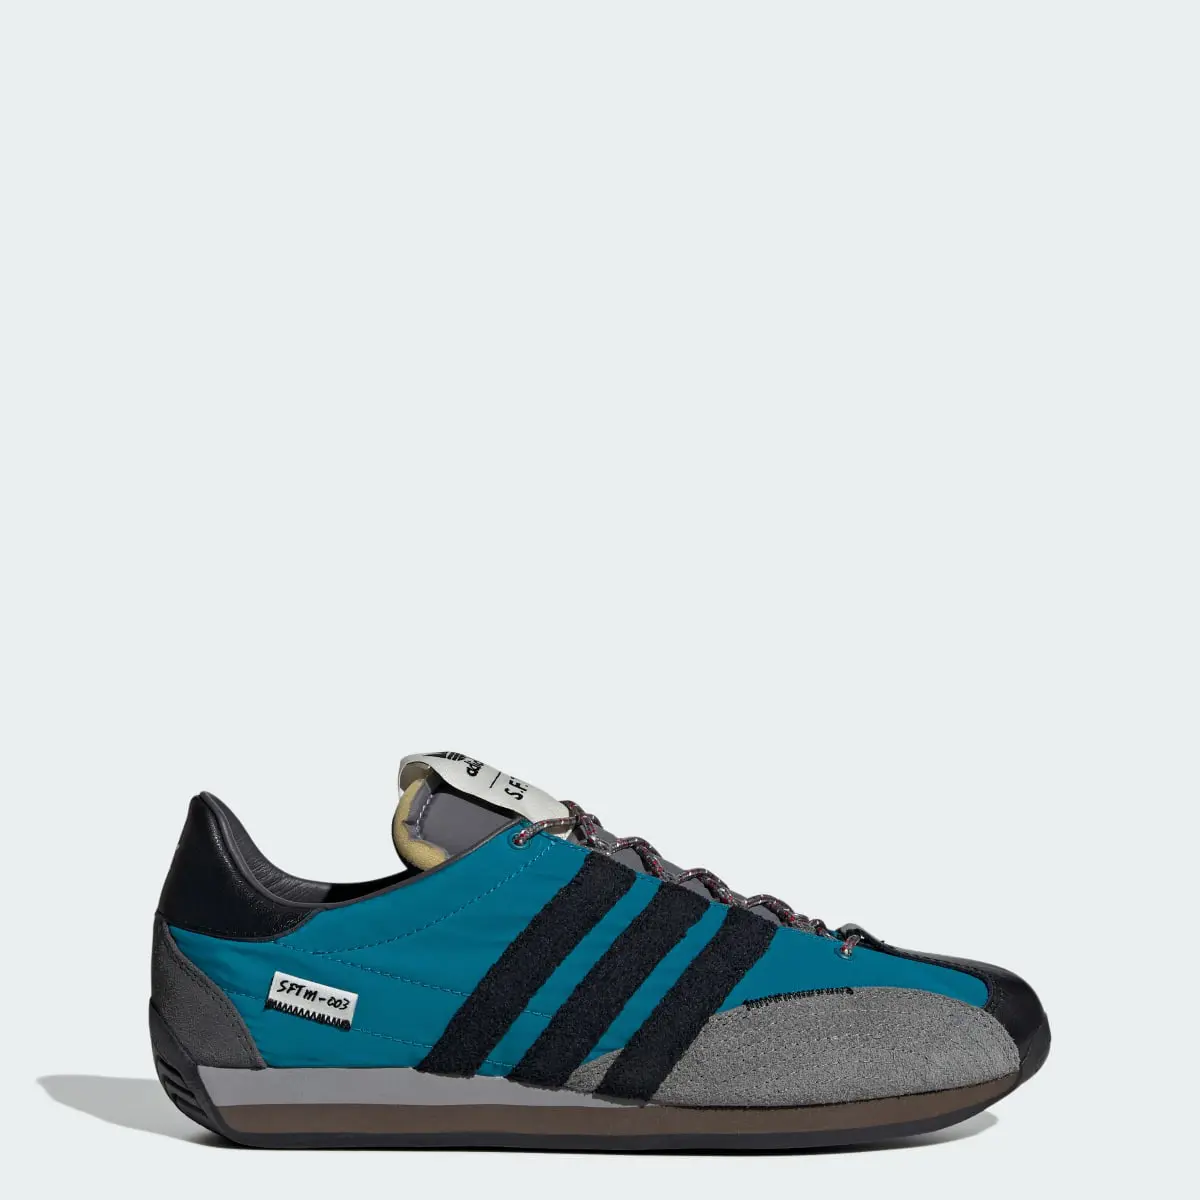 Adidas Country OG Low Trainers. 1